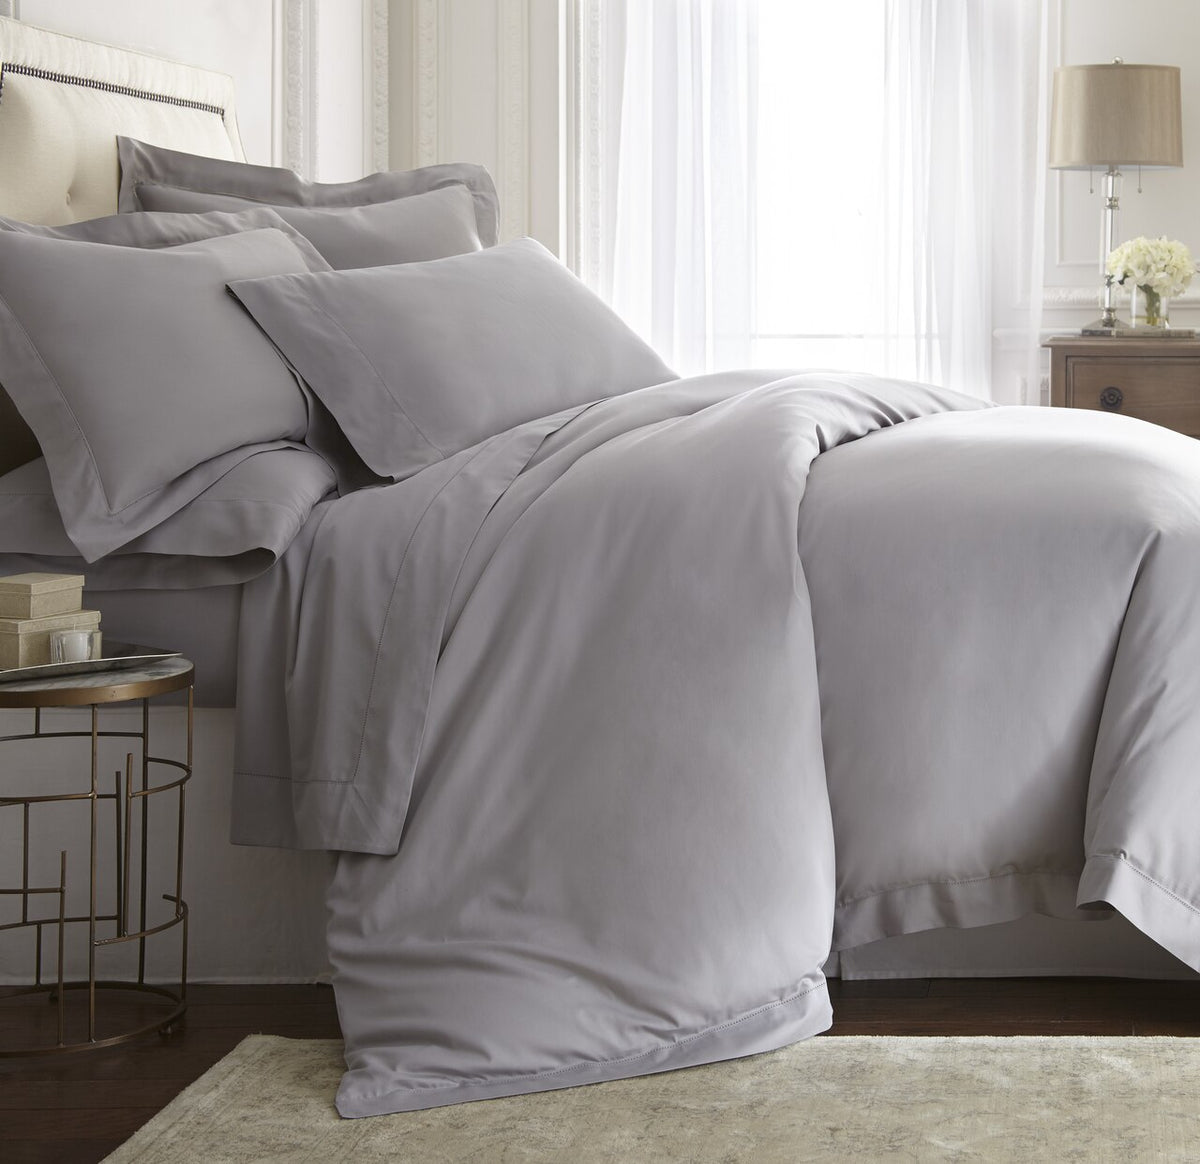 DUMEE 100% Cotton Cloth Duvet Cover Queen/Full Size Bedding (Grey, 3PC Set)